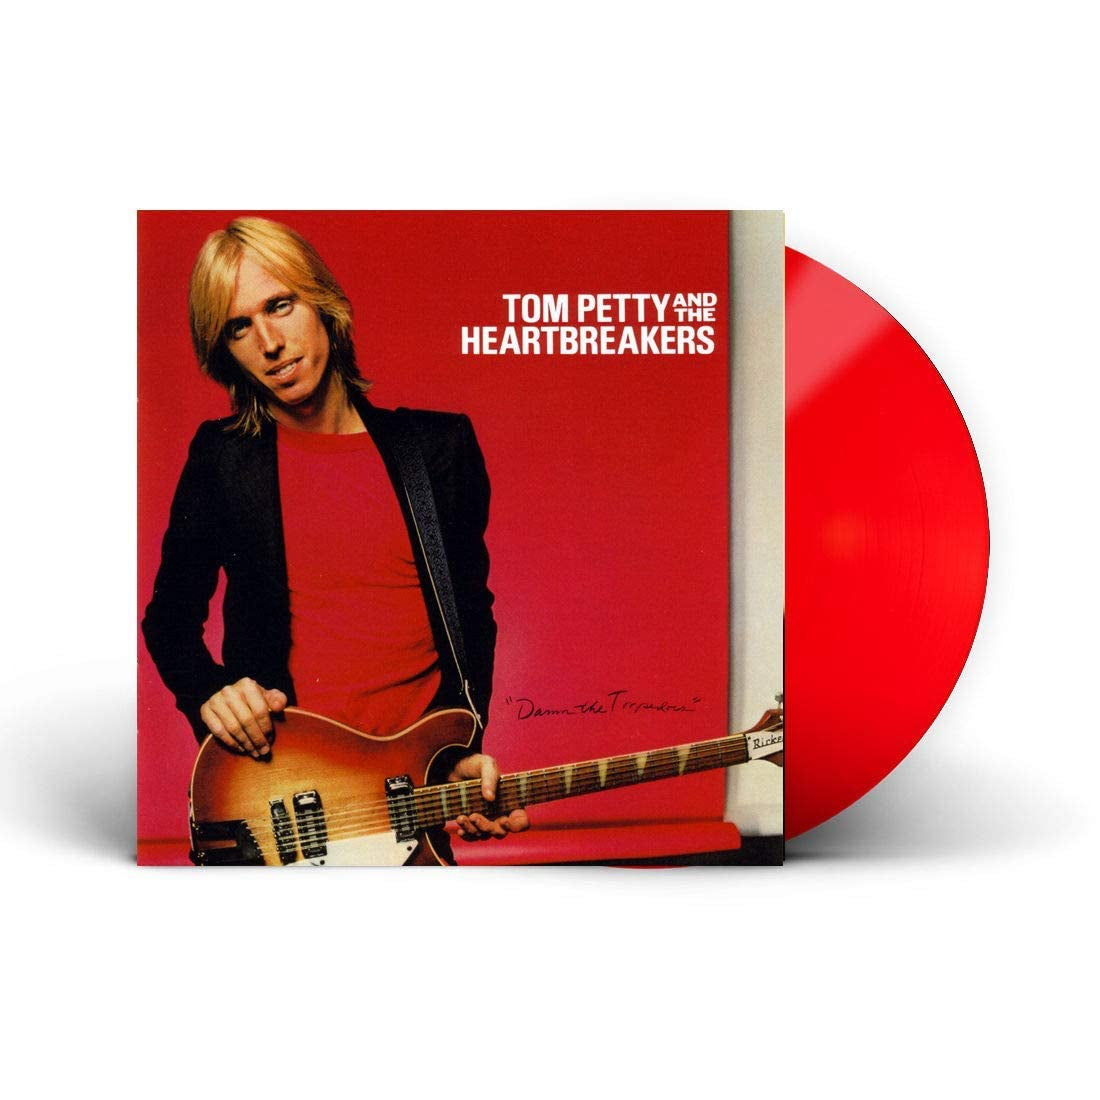 Tom Petty "Damn The Torpedoes" Album On Red Color Vinyl LP Record